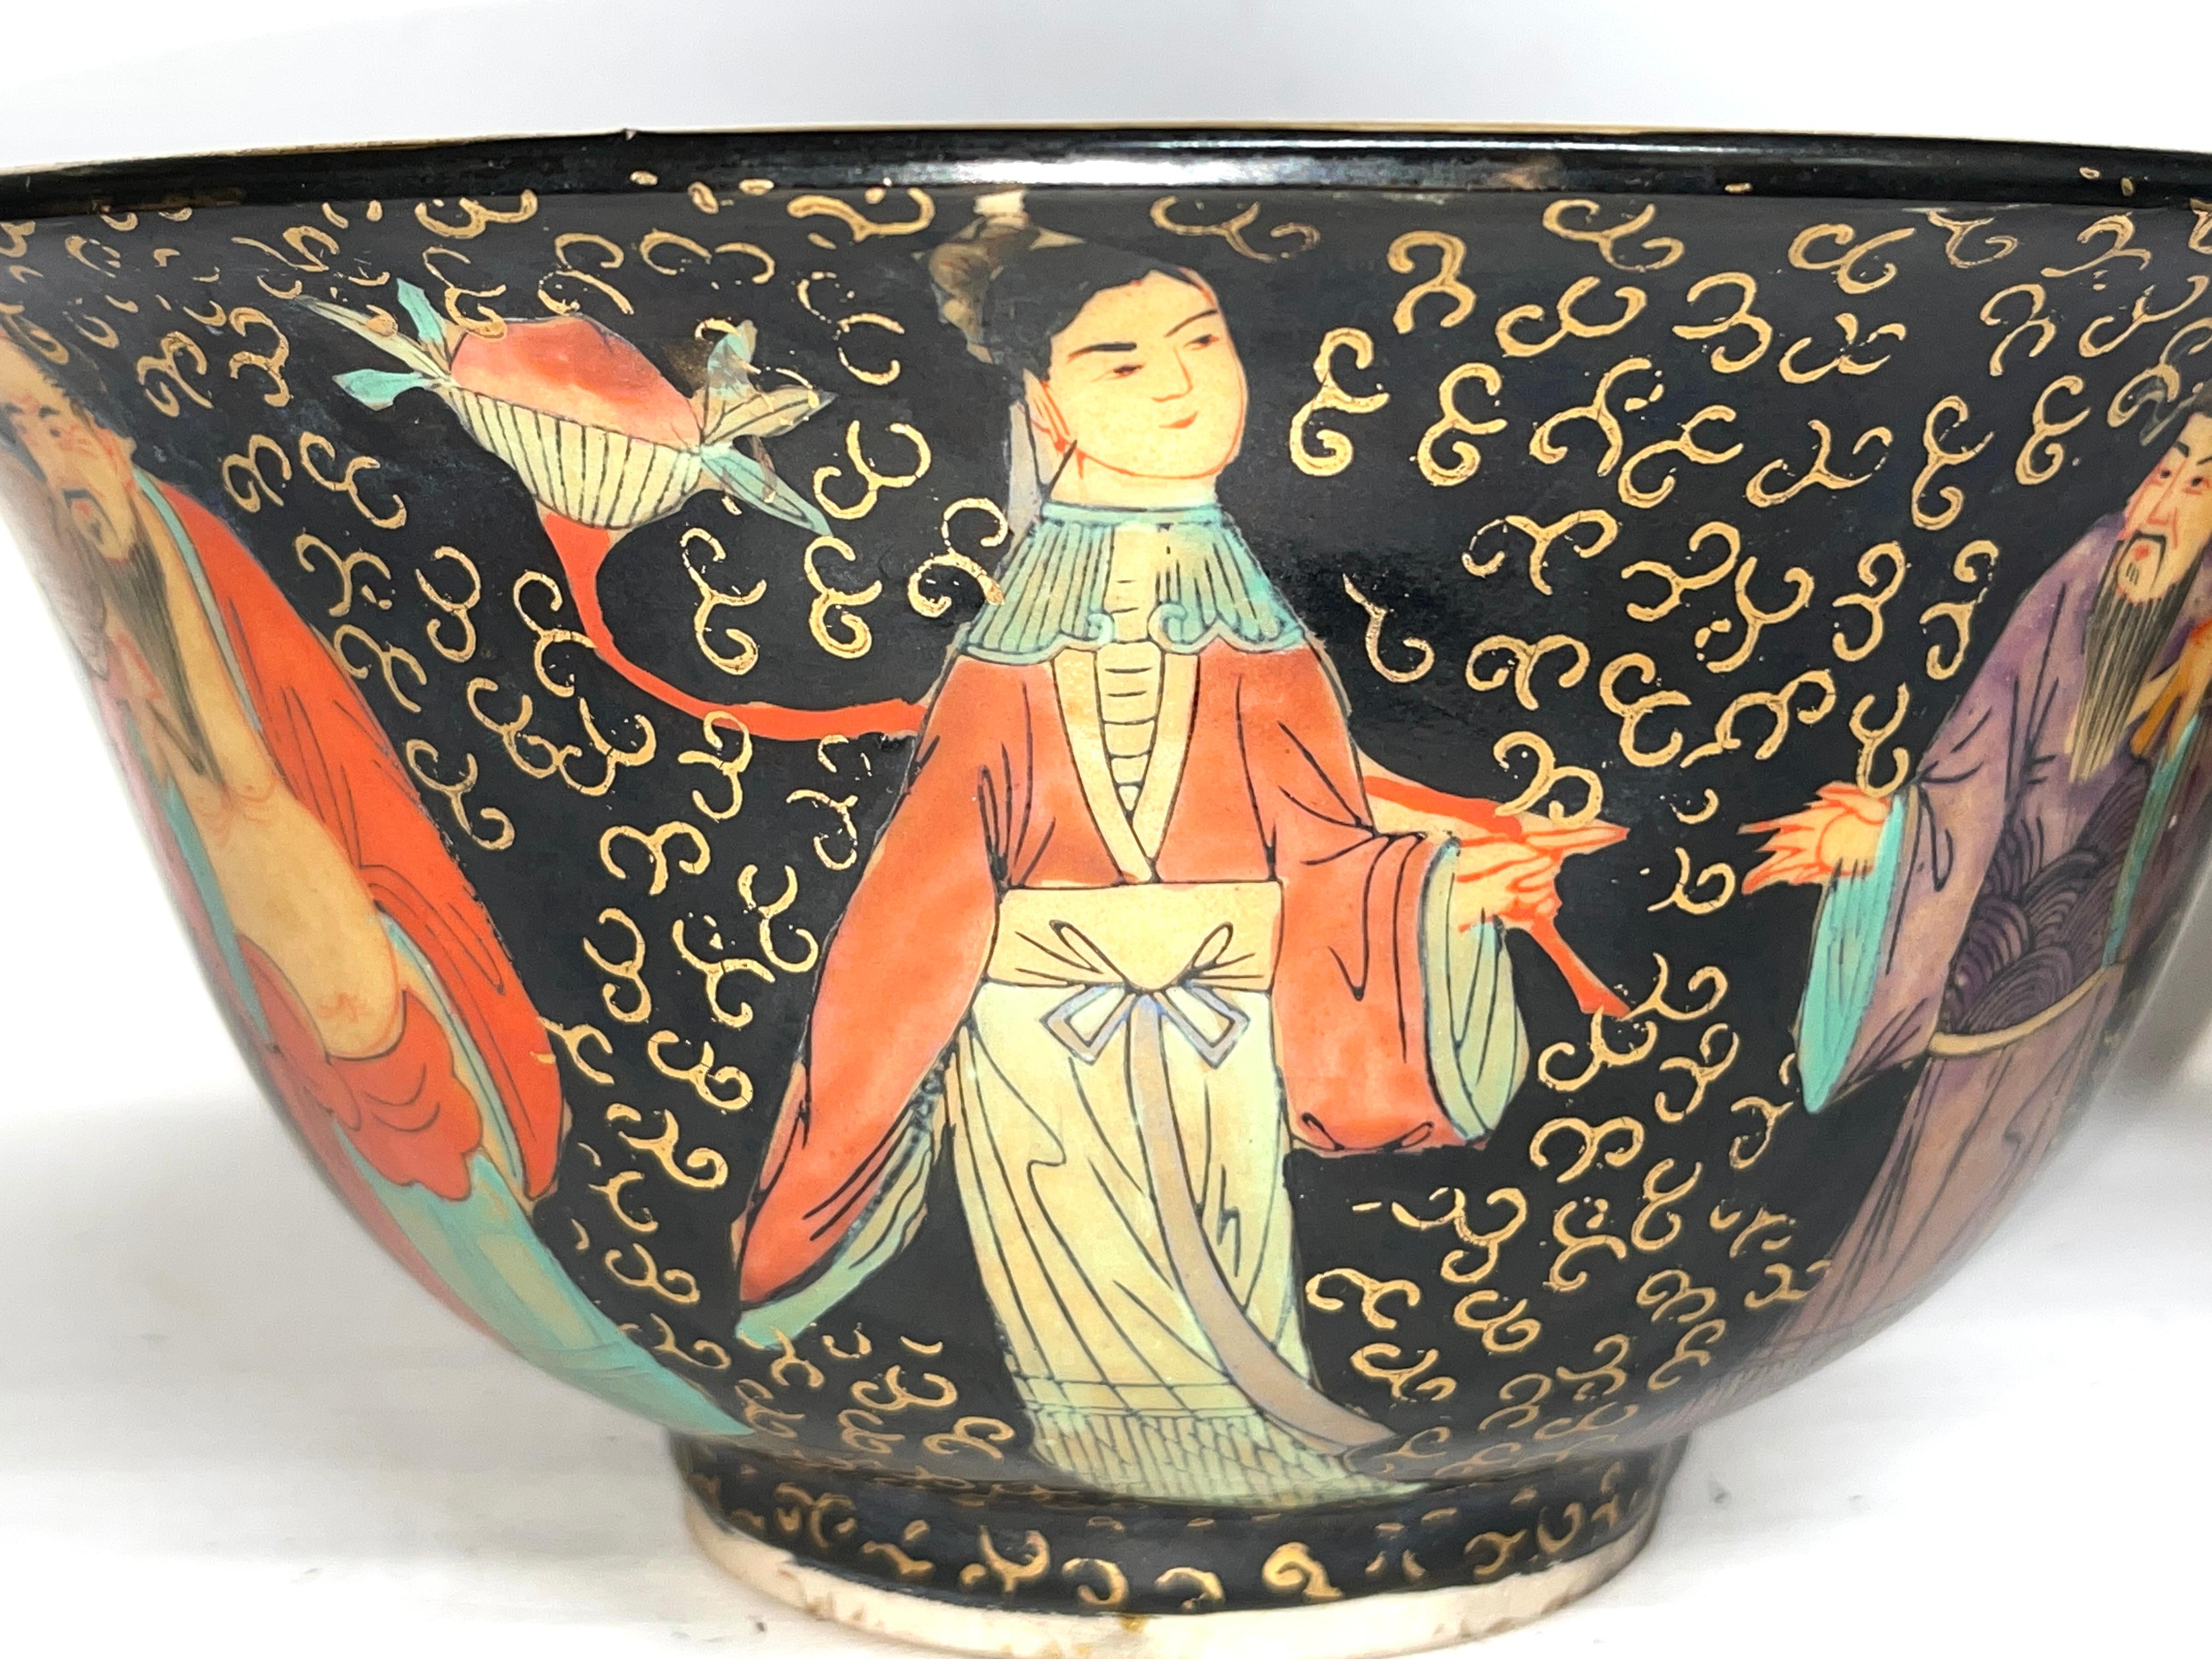 Pair of Antique Chinese Ceramic Bowls, 20th Century, Asian Art For Sale 9